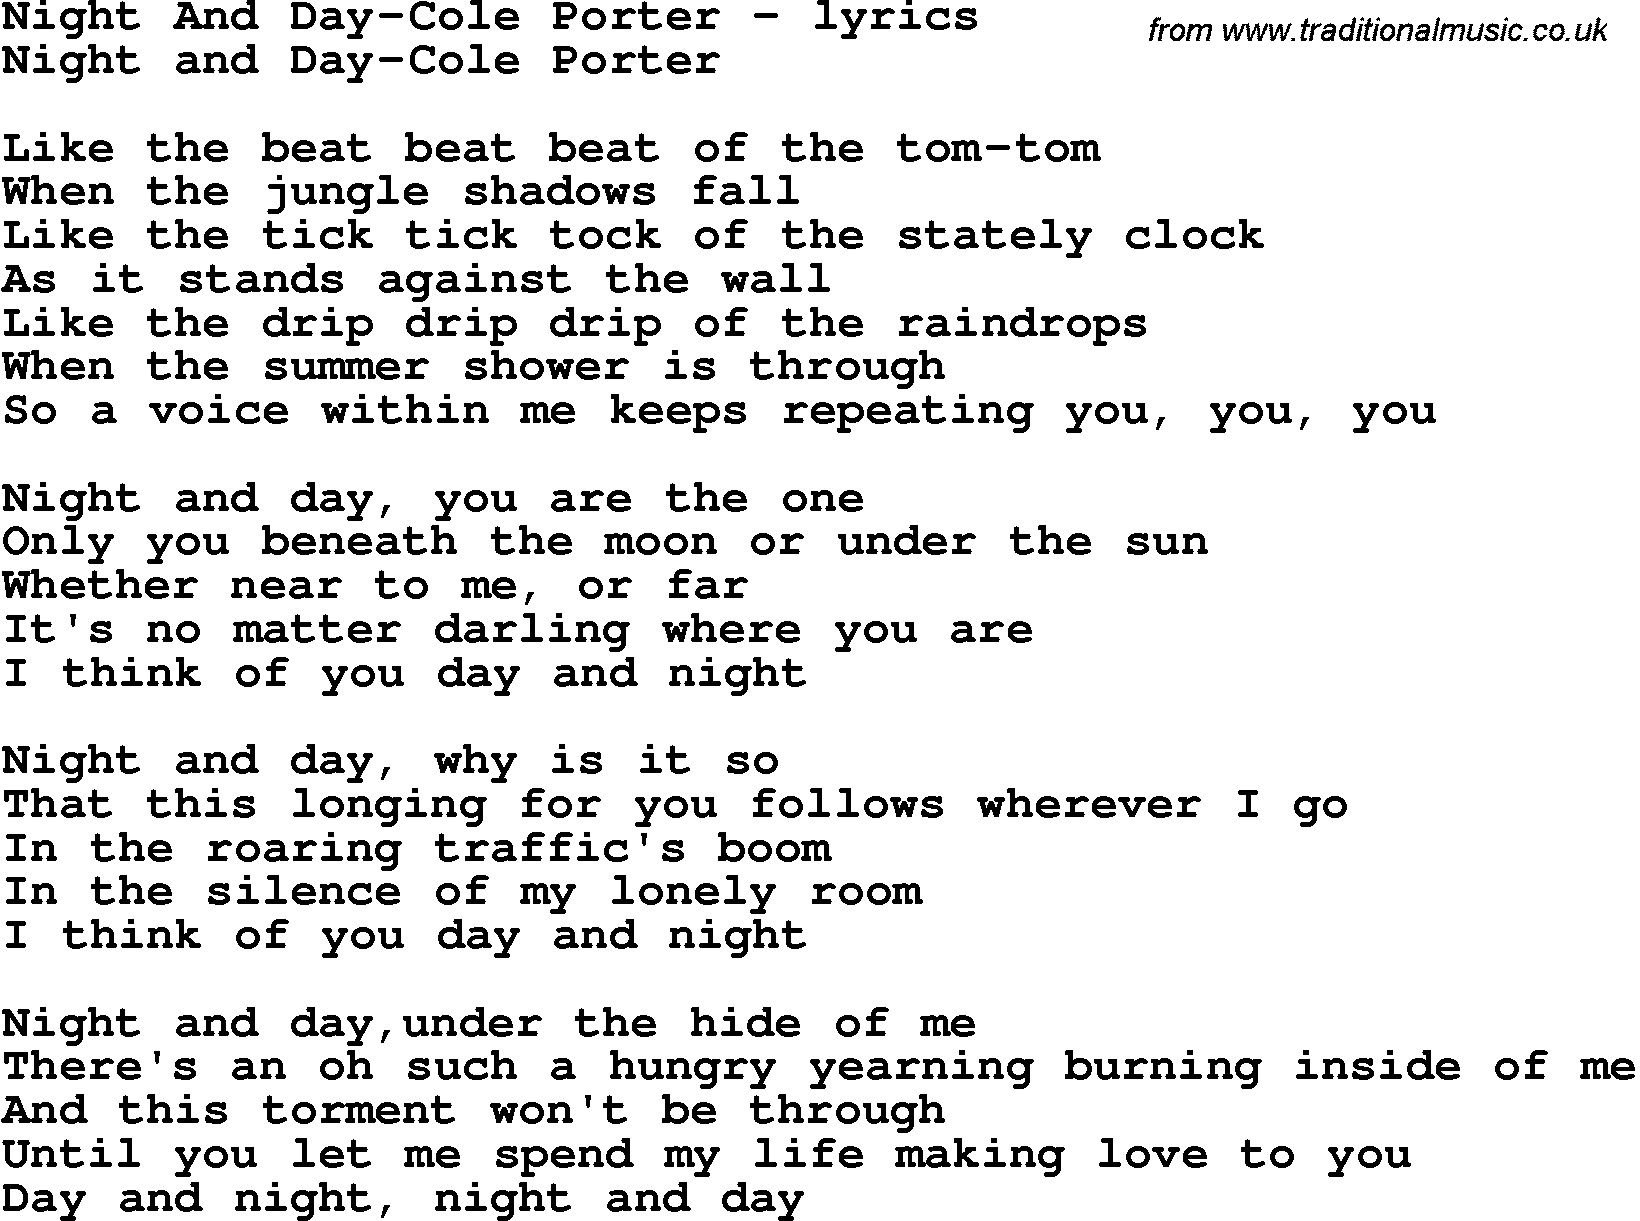 Love Song Lyrics for: Night And Day-Cole Porter